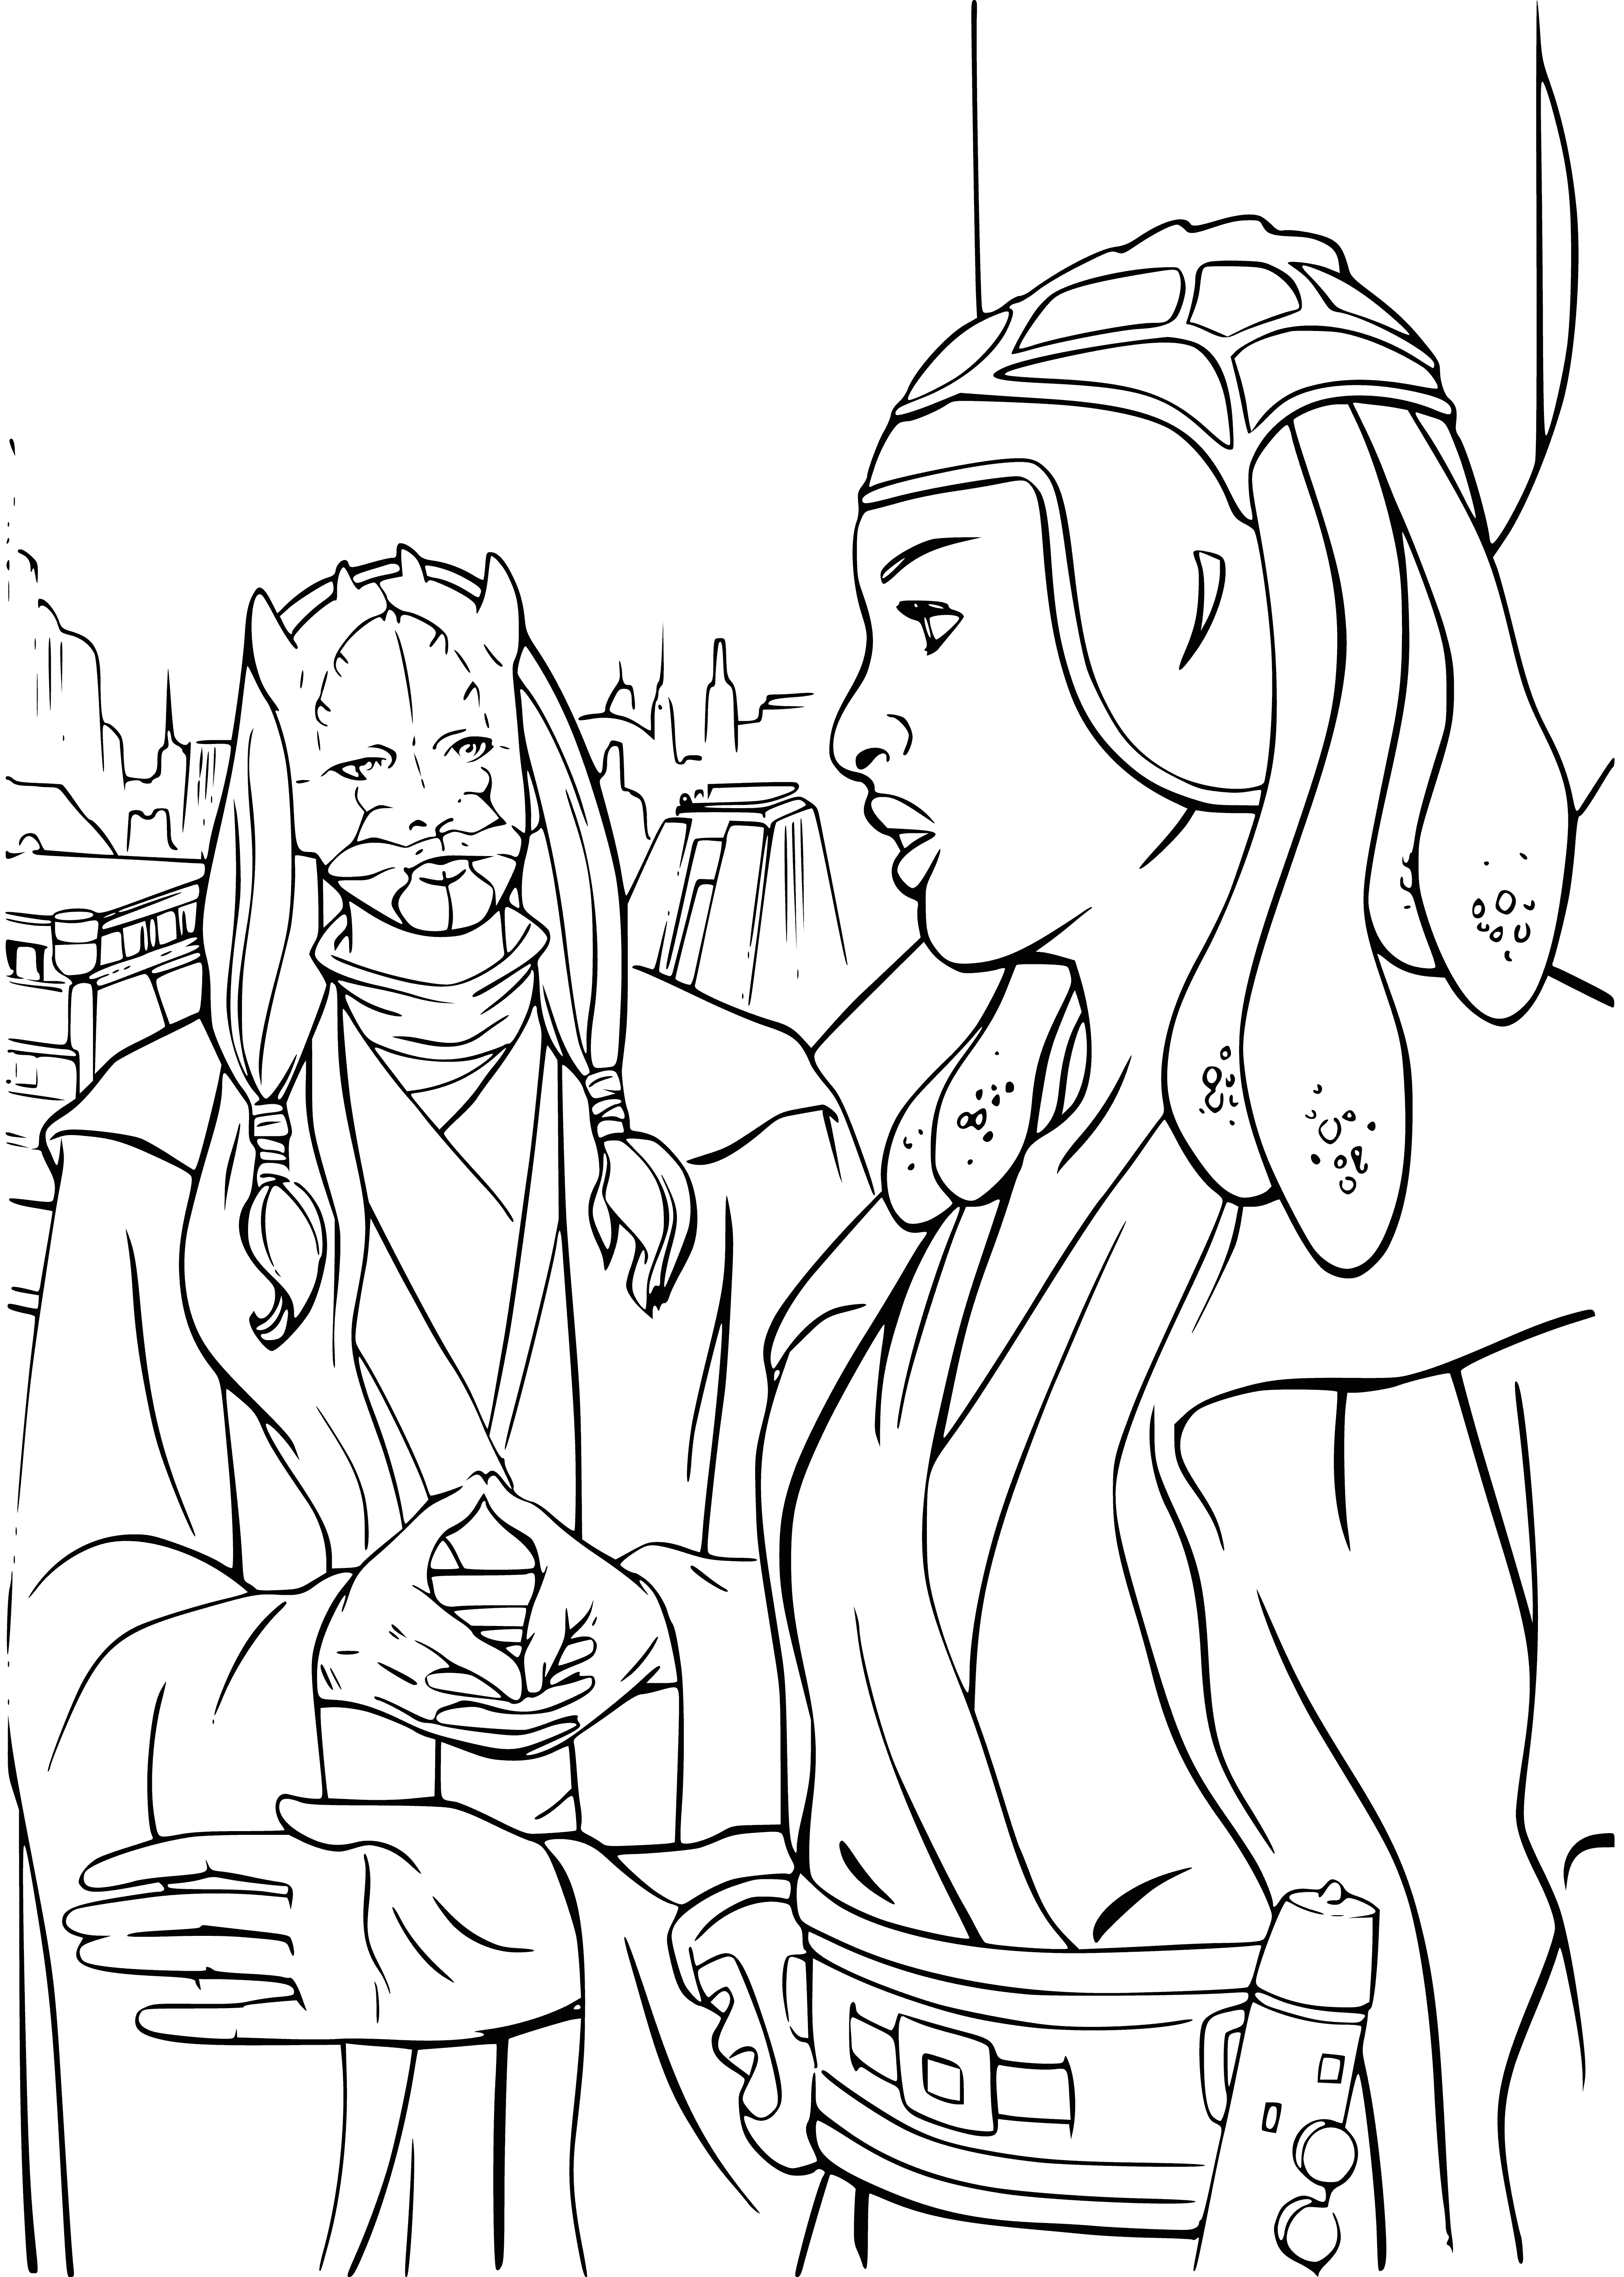 coloring page: Jedi Qui-Gon and Obi-Wan protect Queen Amidala and discover Anakin Skywalker on Tatooine. Darth Maul engages them in a lightsaber battle that ends with him nearly dead. Anakin is chosen to be trained as a Jedi.